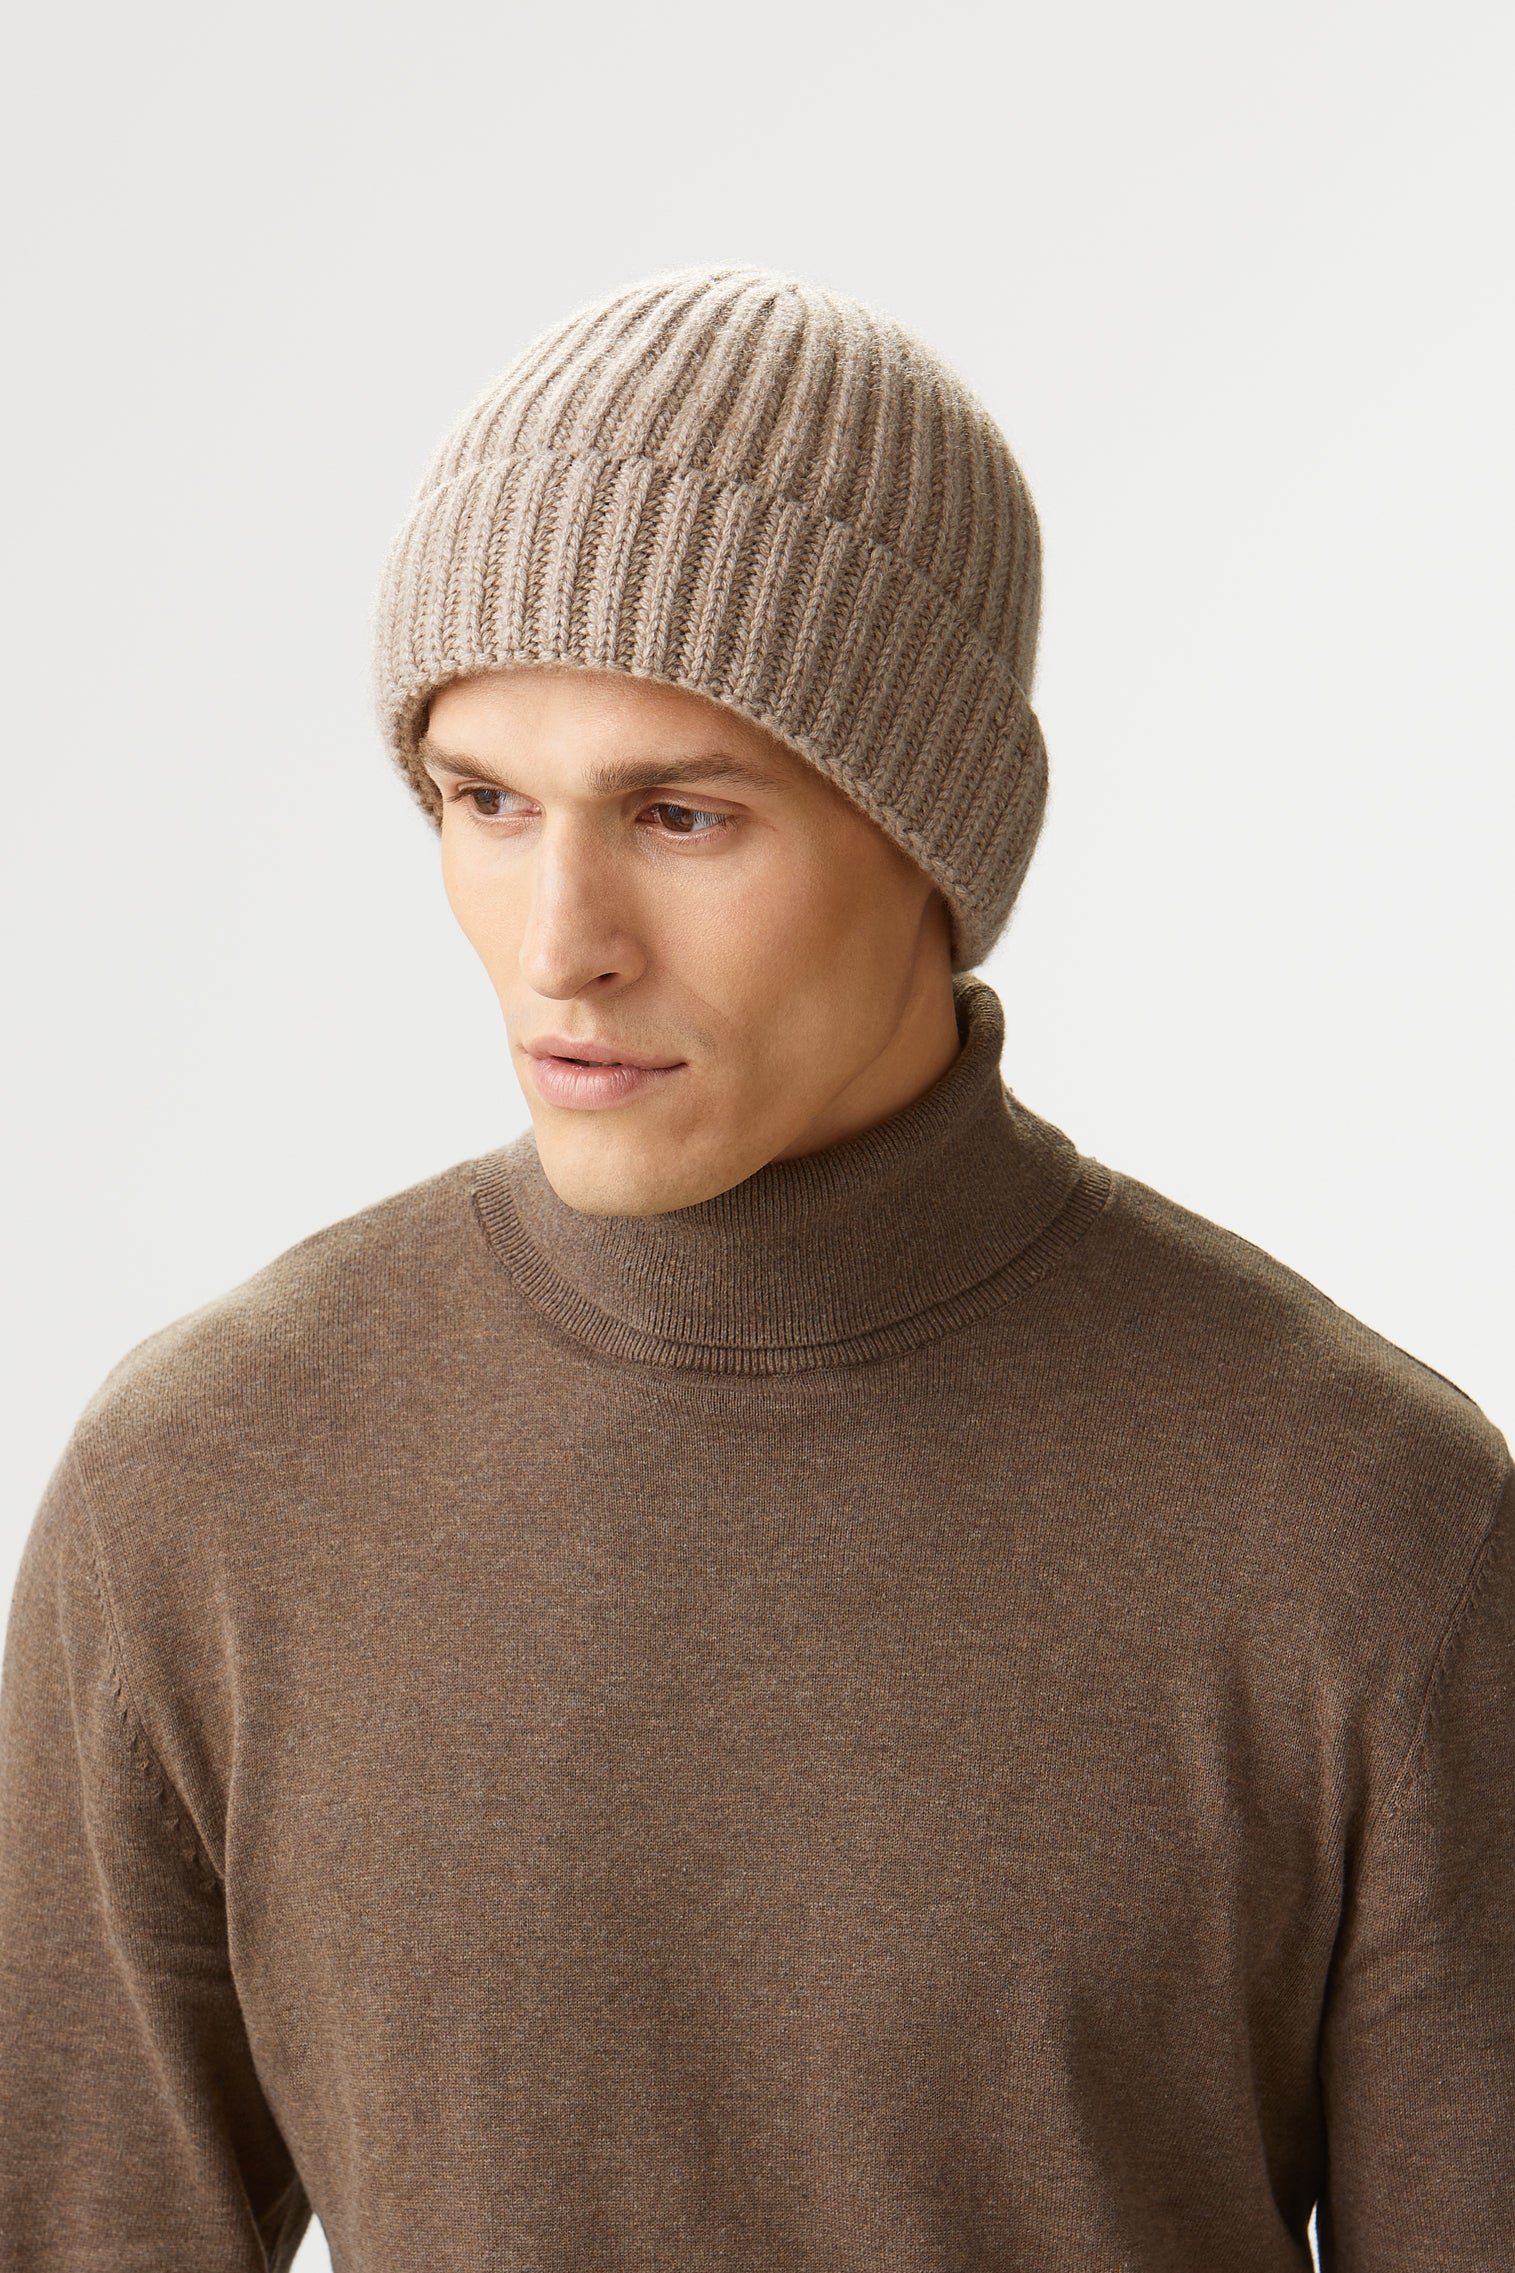 Rannoch Cashmere Beanie - Hats for Oval Face Shapes - Lock & Co. Hatters London UK